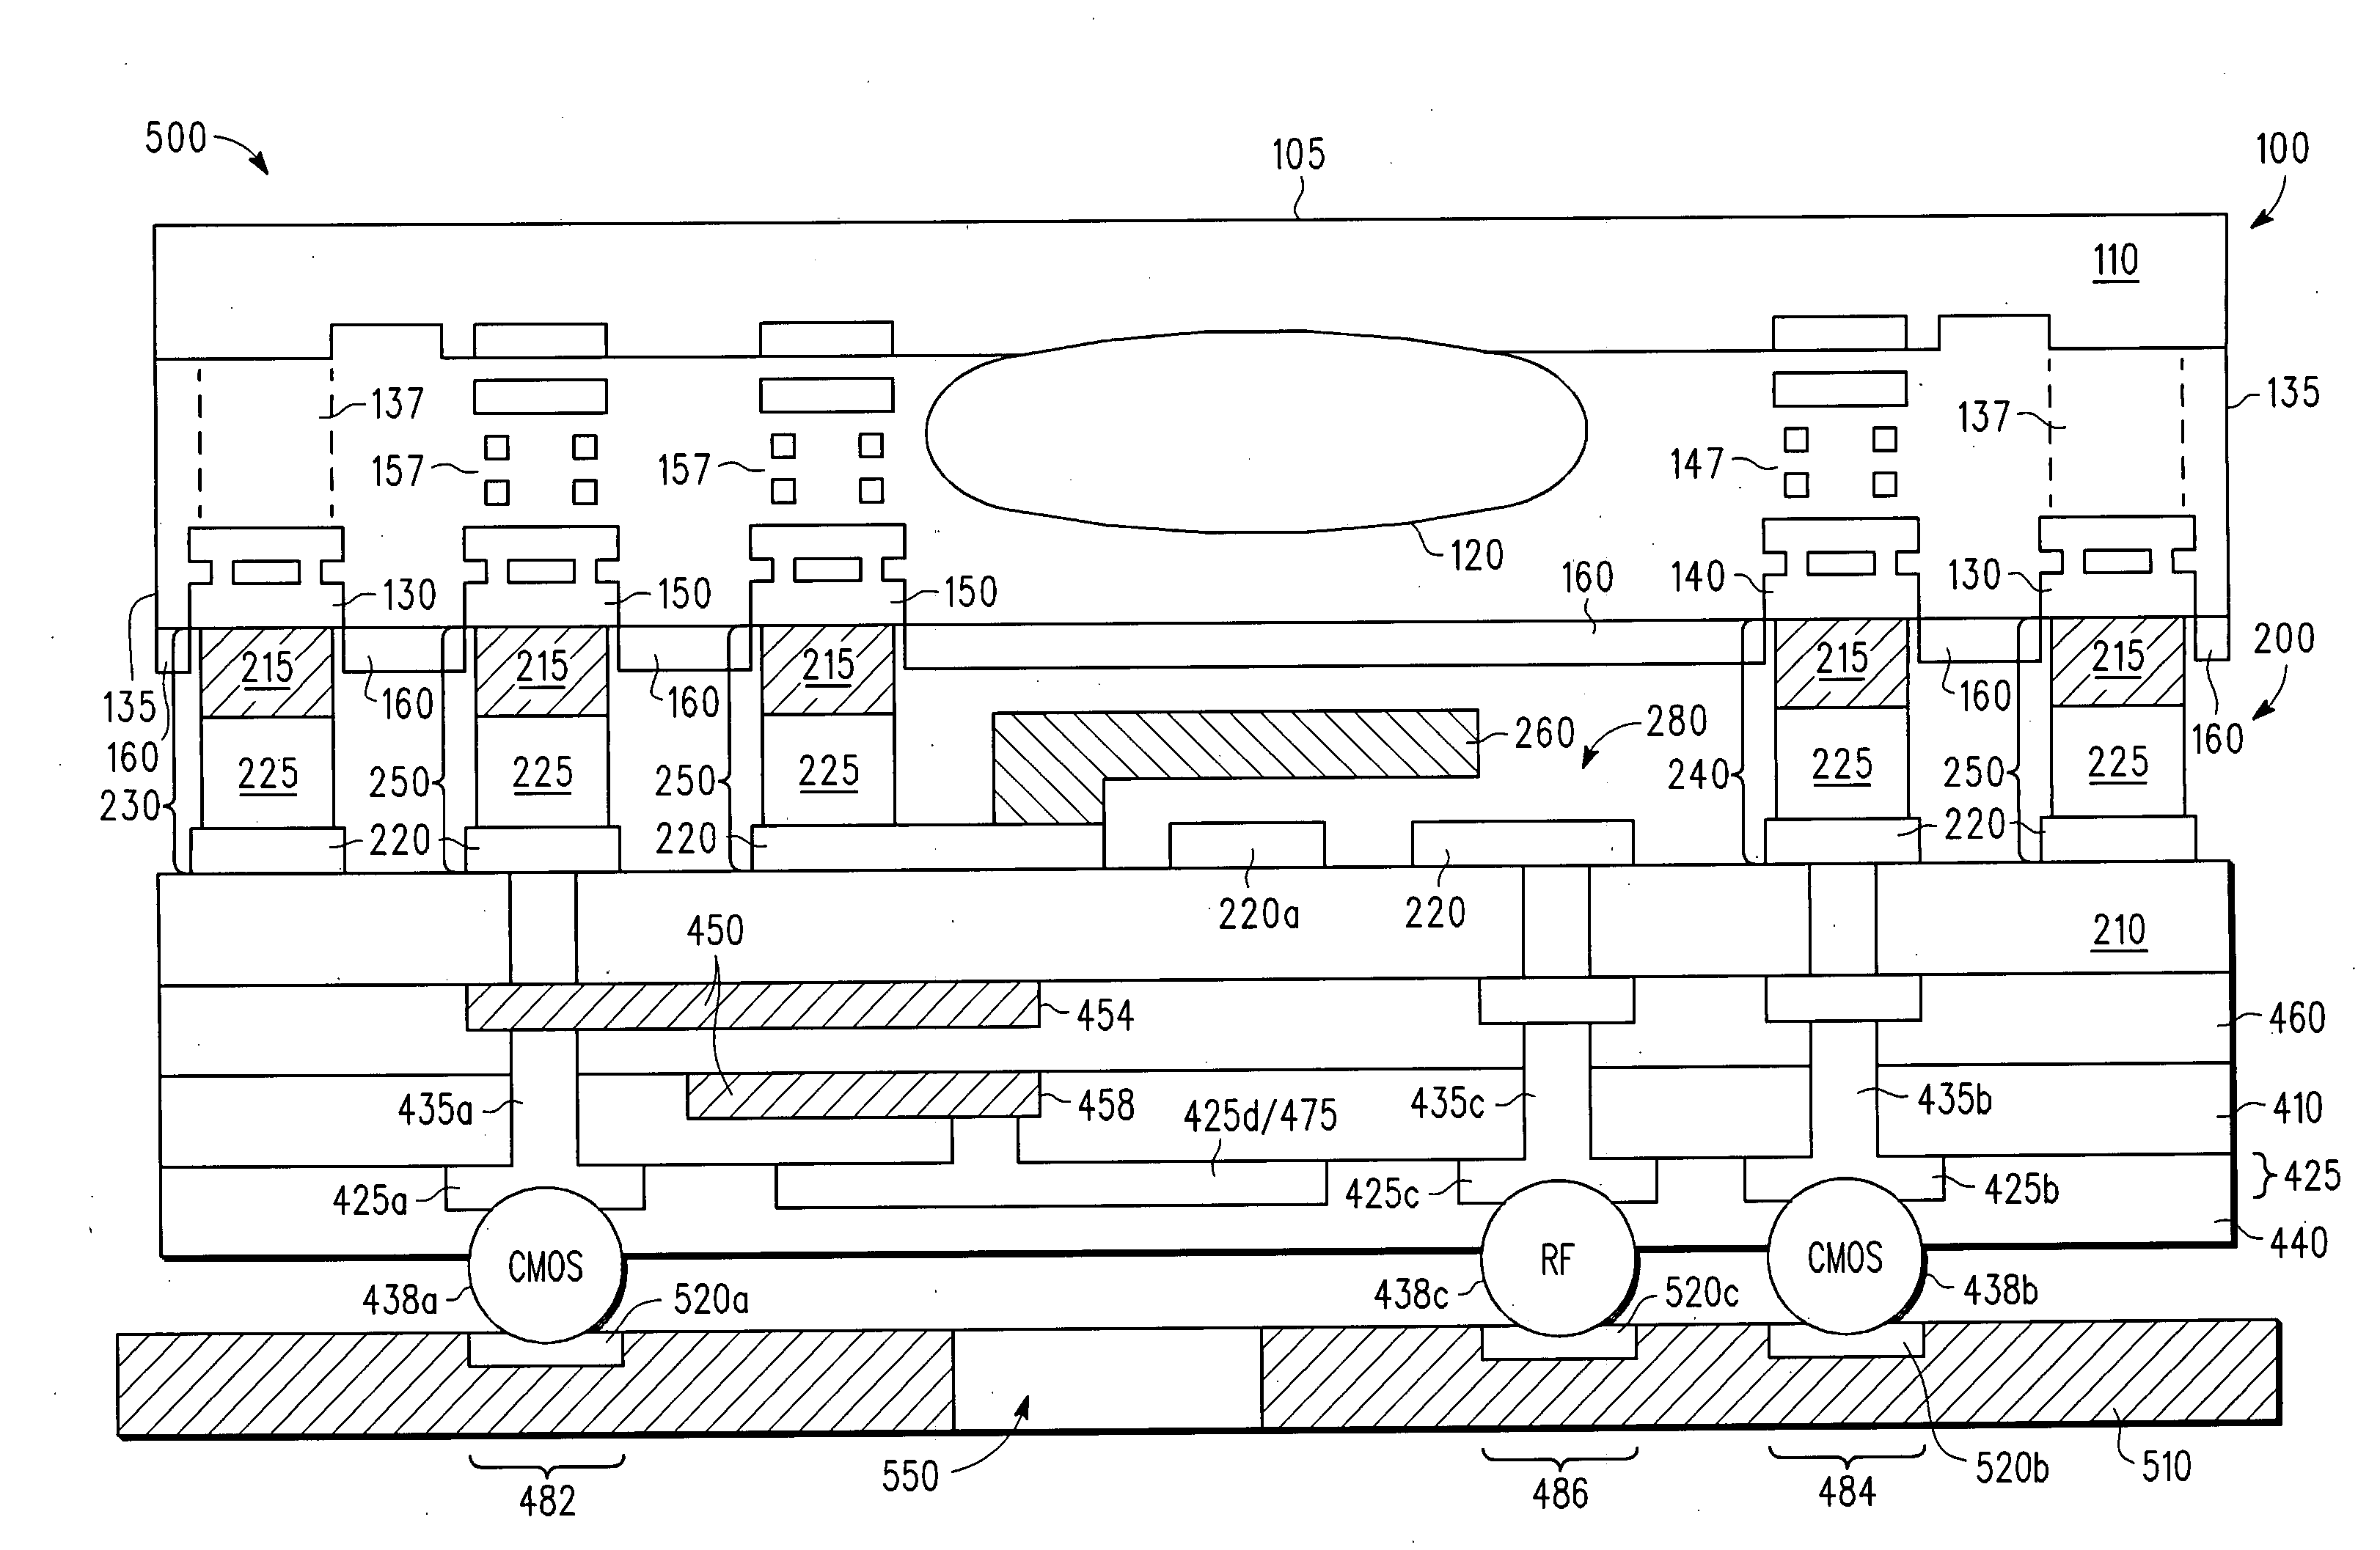 Micro-electro-mechanical systems device and integrated circuit device integrated in a three-dimensional semiconductor structure